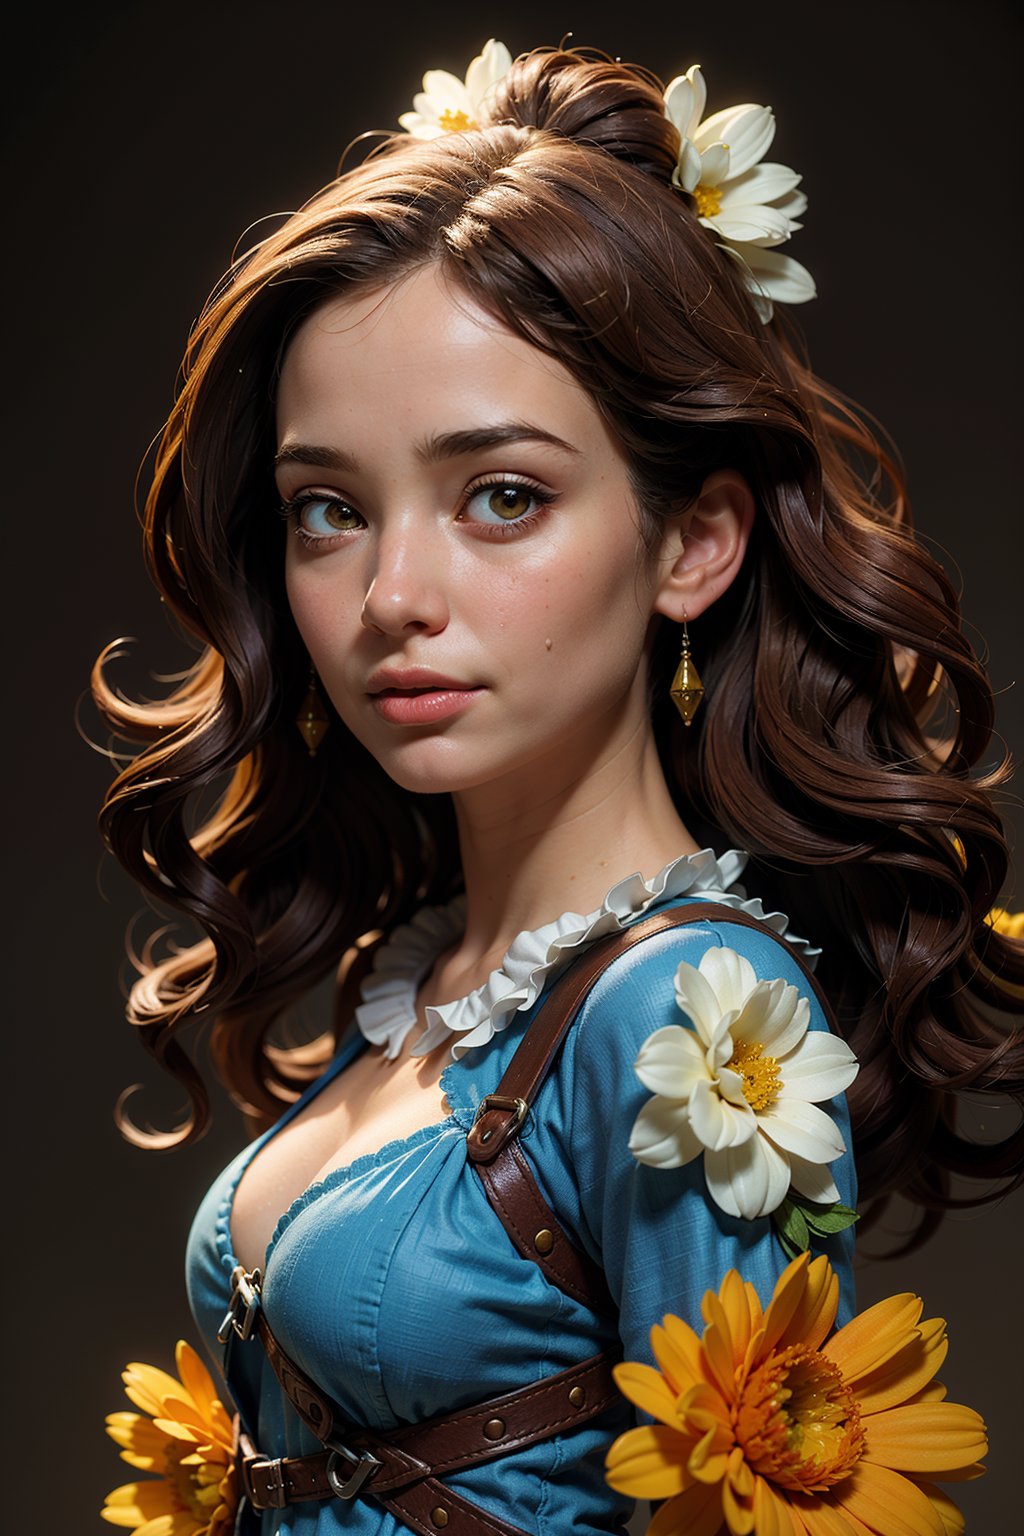 (best quality,  realistic,  high-resolution),  colorful portrait of a woman with flawless anatomy. She is wearing a stunning flower dress that compliments her vibrant personality. Her skin is extremely detailed and realistic,  with a natural and lifelike texture. The background is dark,  which creates a striking contrast to the colorful flowers adorning her armor. The flowers on her armor represent her strength and beauty. The lighting accentuates the contours of her face,  adding depth and dimension to the portrait. The overall composition is masterfully done,  showcasing the intricate details and achieving a high level of realism,  Realistic,<lora:EMS-209910-EMS:0.800000>